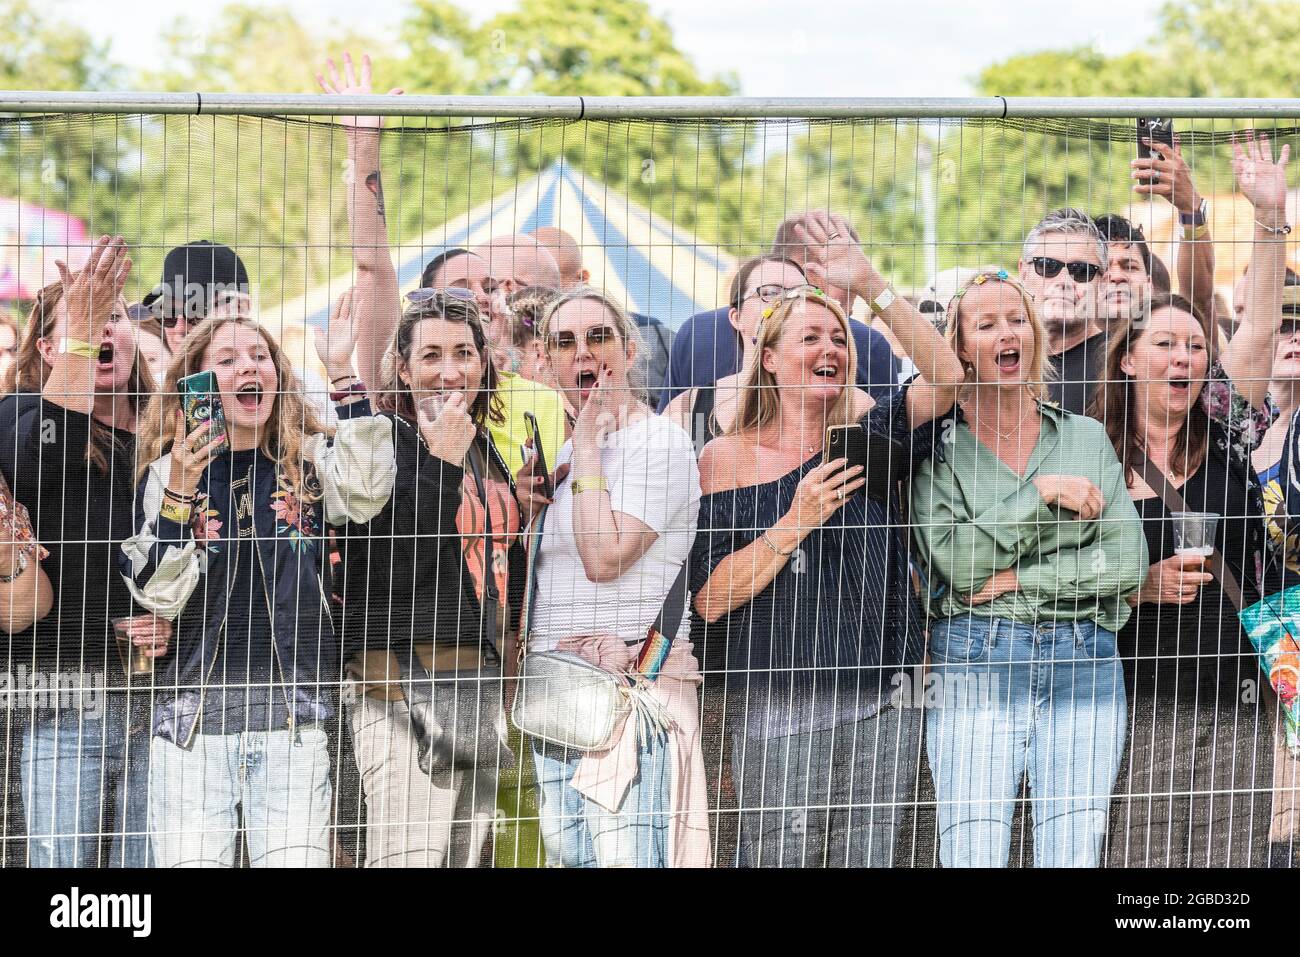 Peter Andre fans at Fantasia music concert in Maldon, Essex, UK soon after lifting of COVID restrictions. Adoring females shouting for his attention Stock Photo